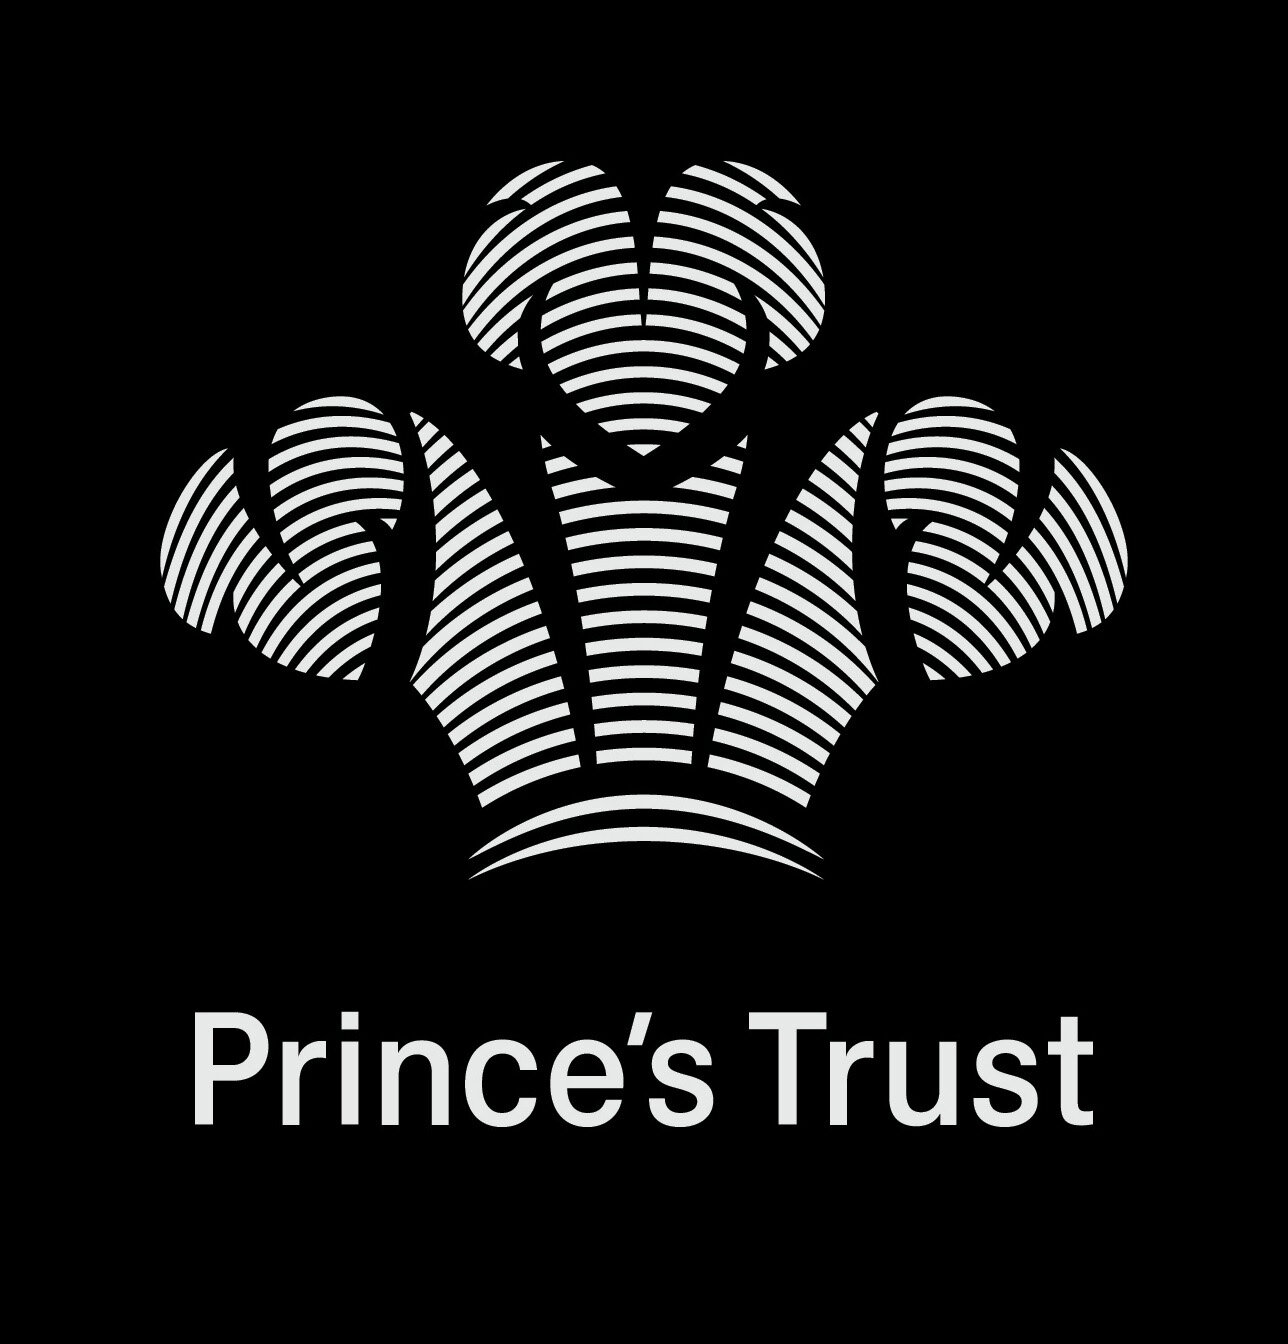 Supported by The princes Trust